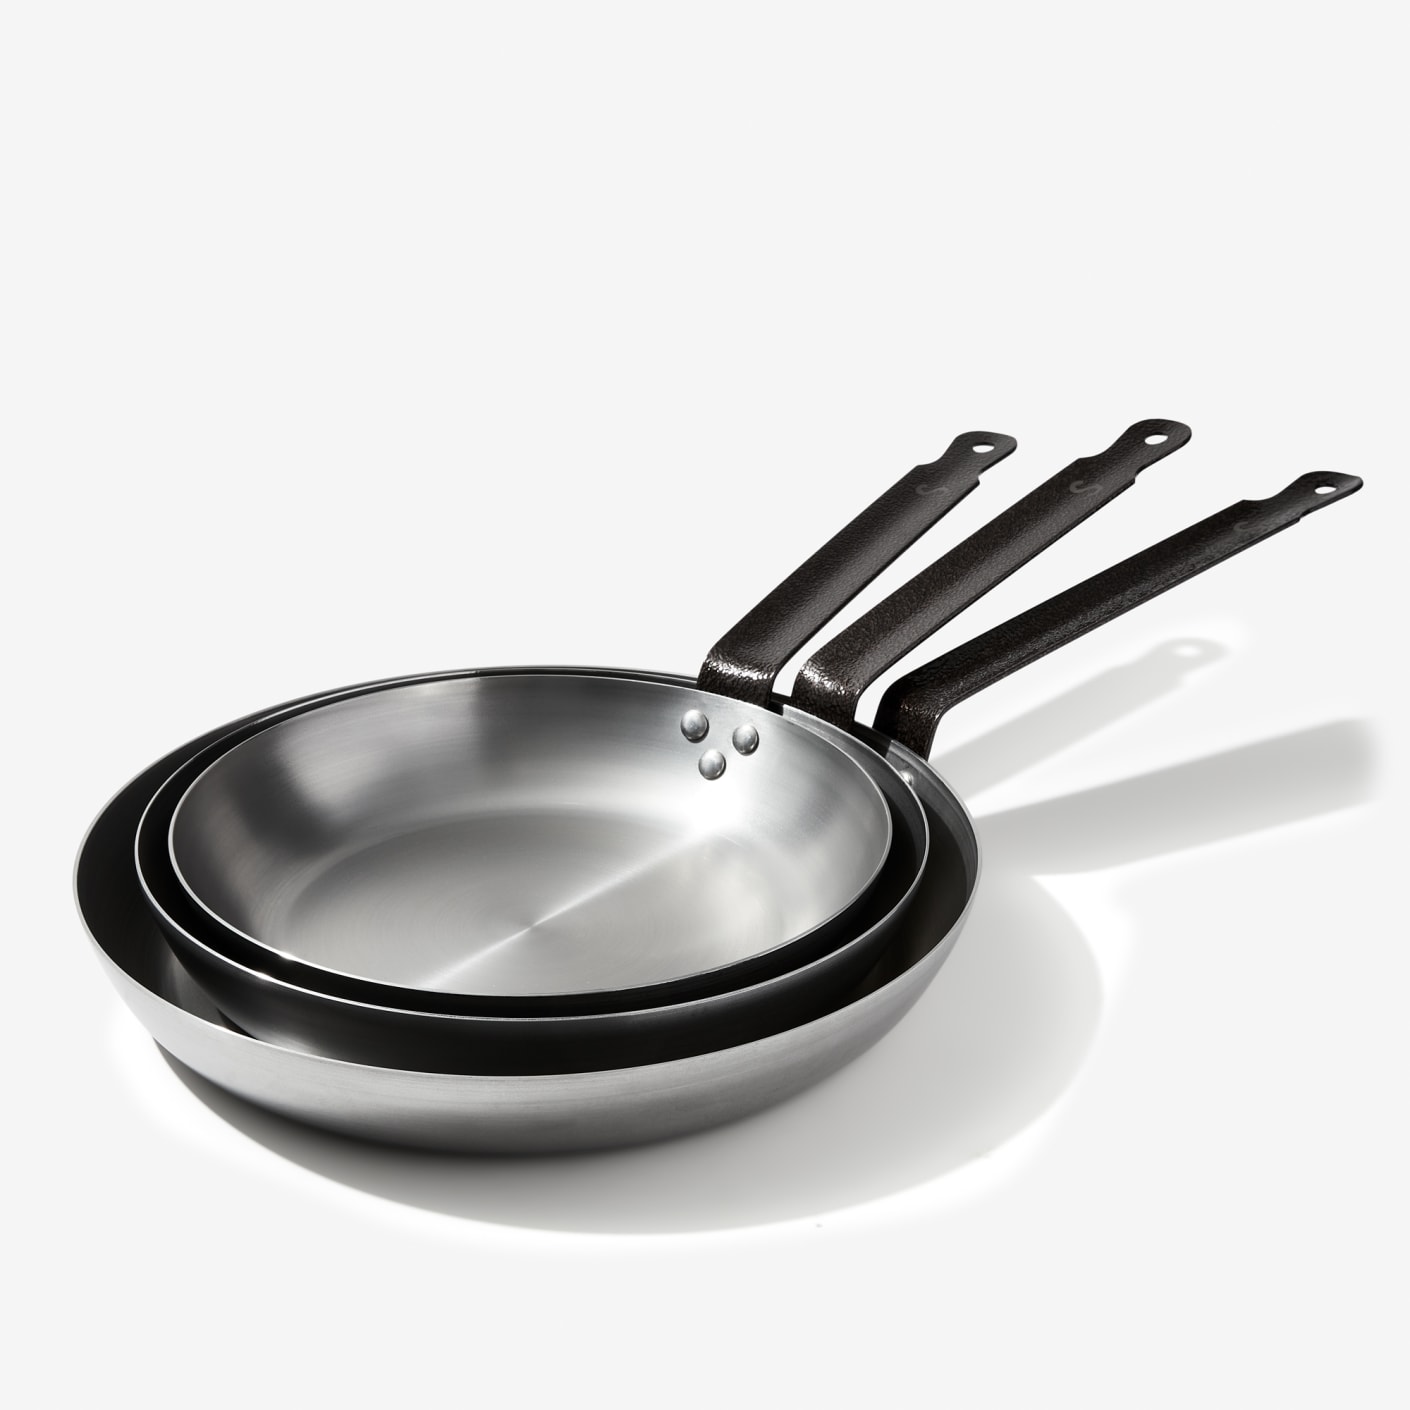 Sardel Cookware Review: Is It the Best Stainless Steel Cookware Brand?